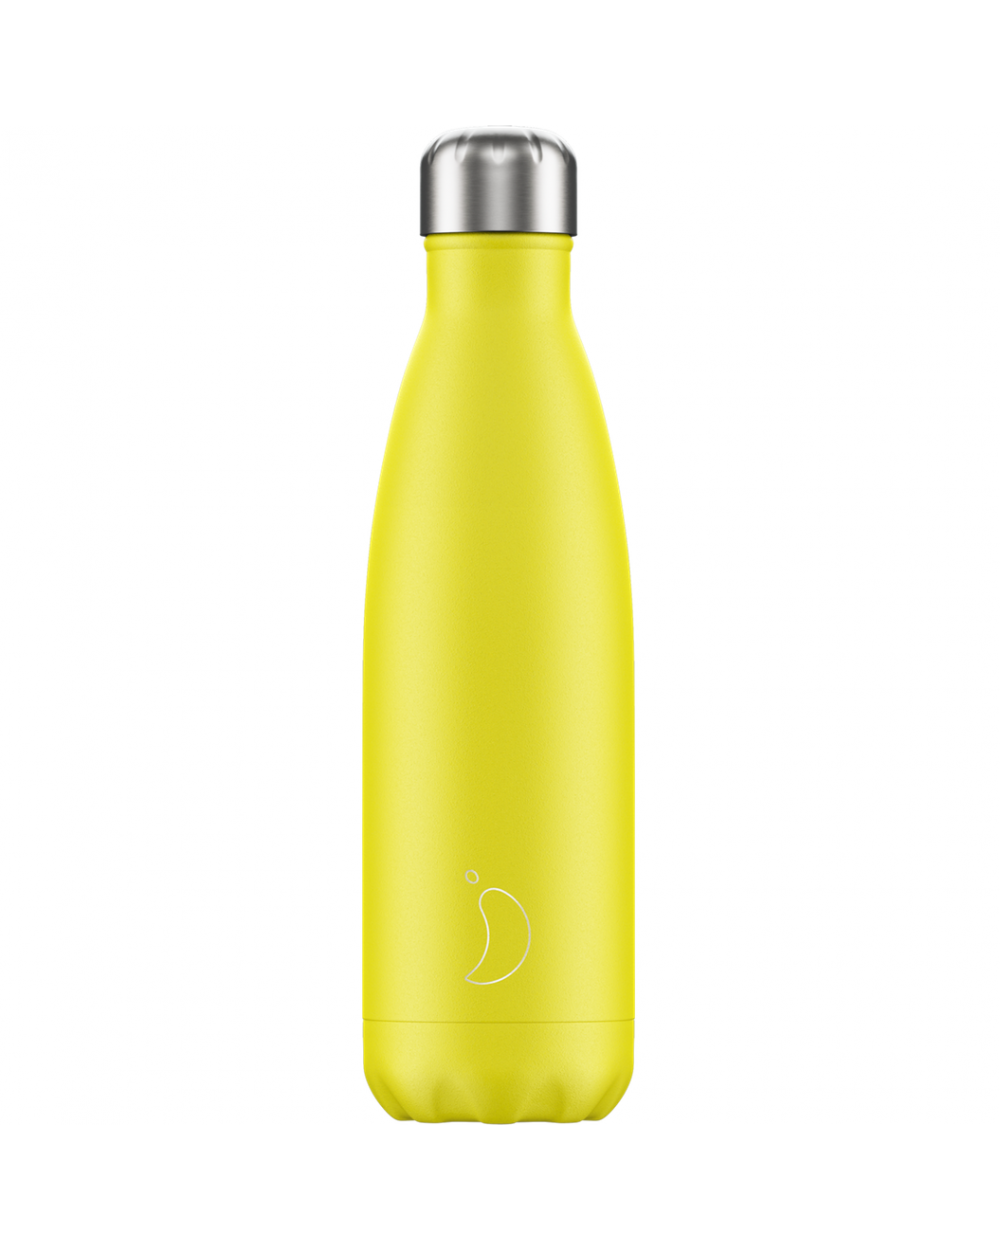 Chilly’s bottle colore neon giallo